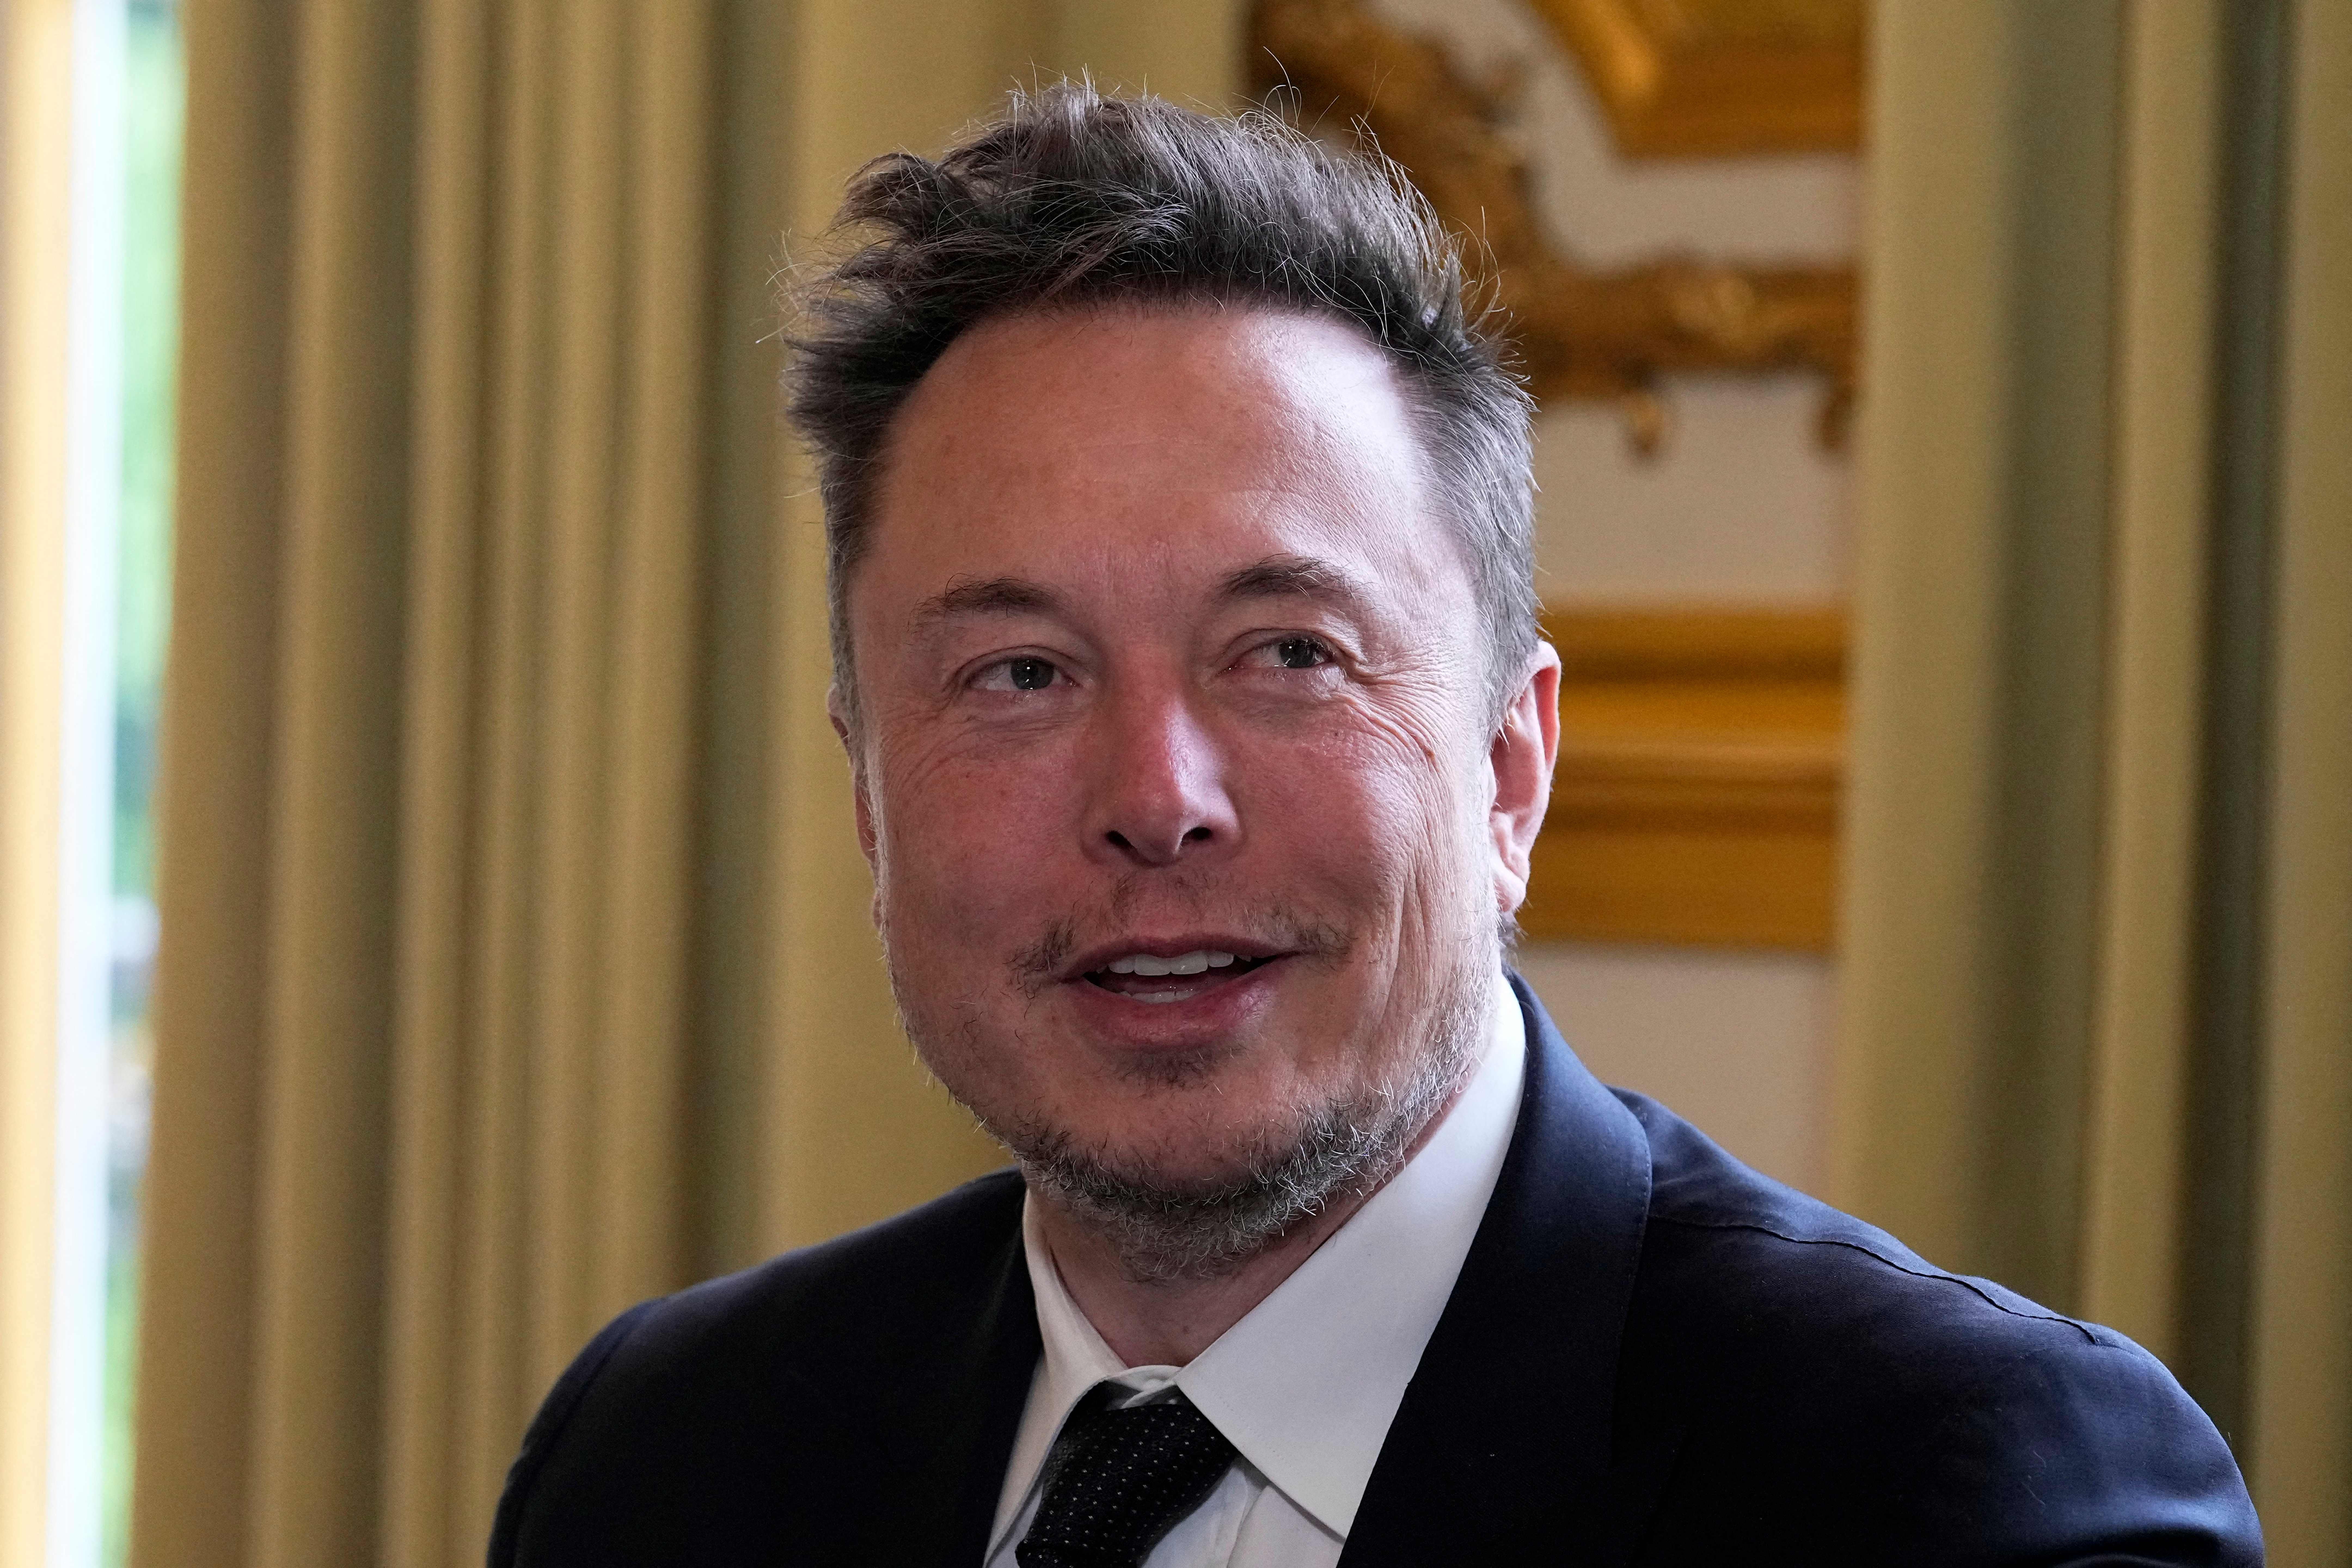 Tesla CEO Elon Musk is once again the world’s richest person